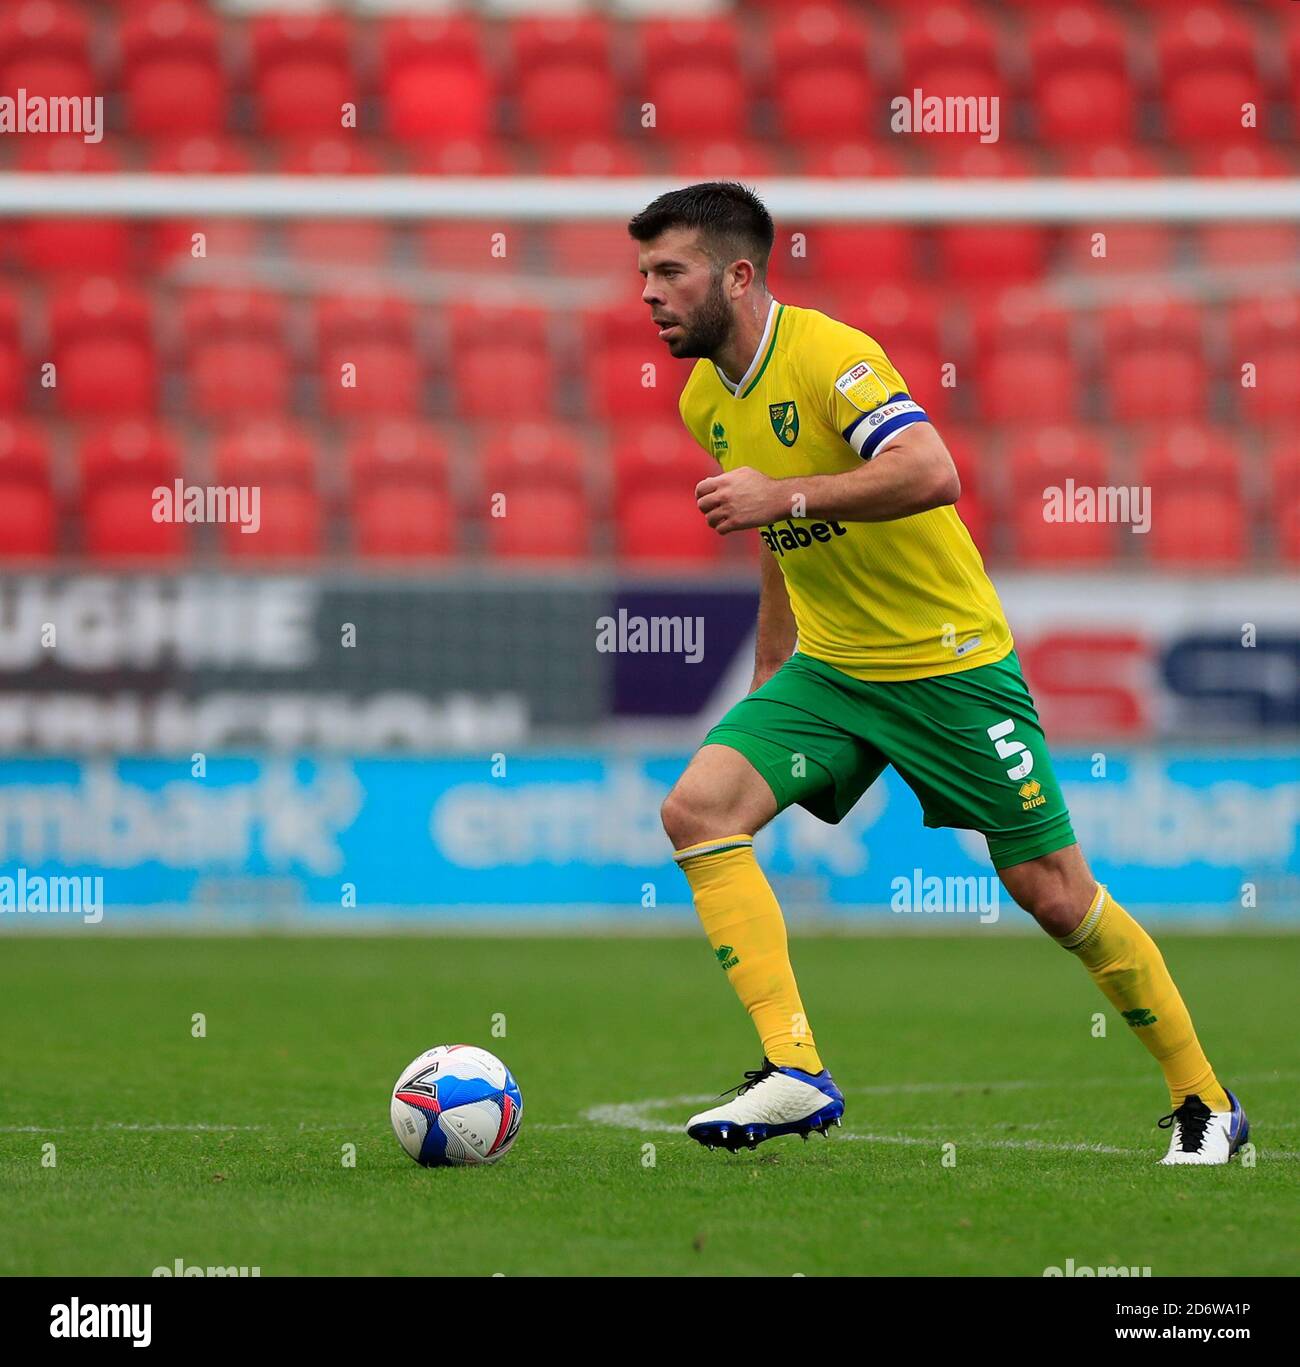 Grant Hanley (5) of Norwich City runs with the ball Stock Photo